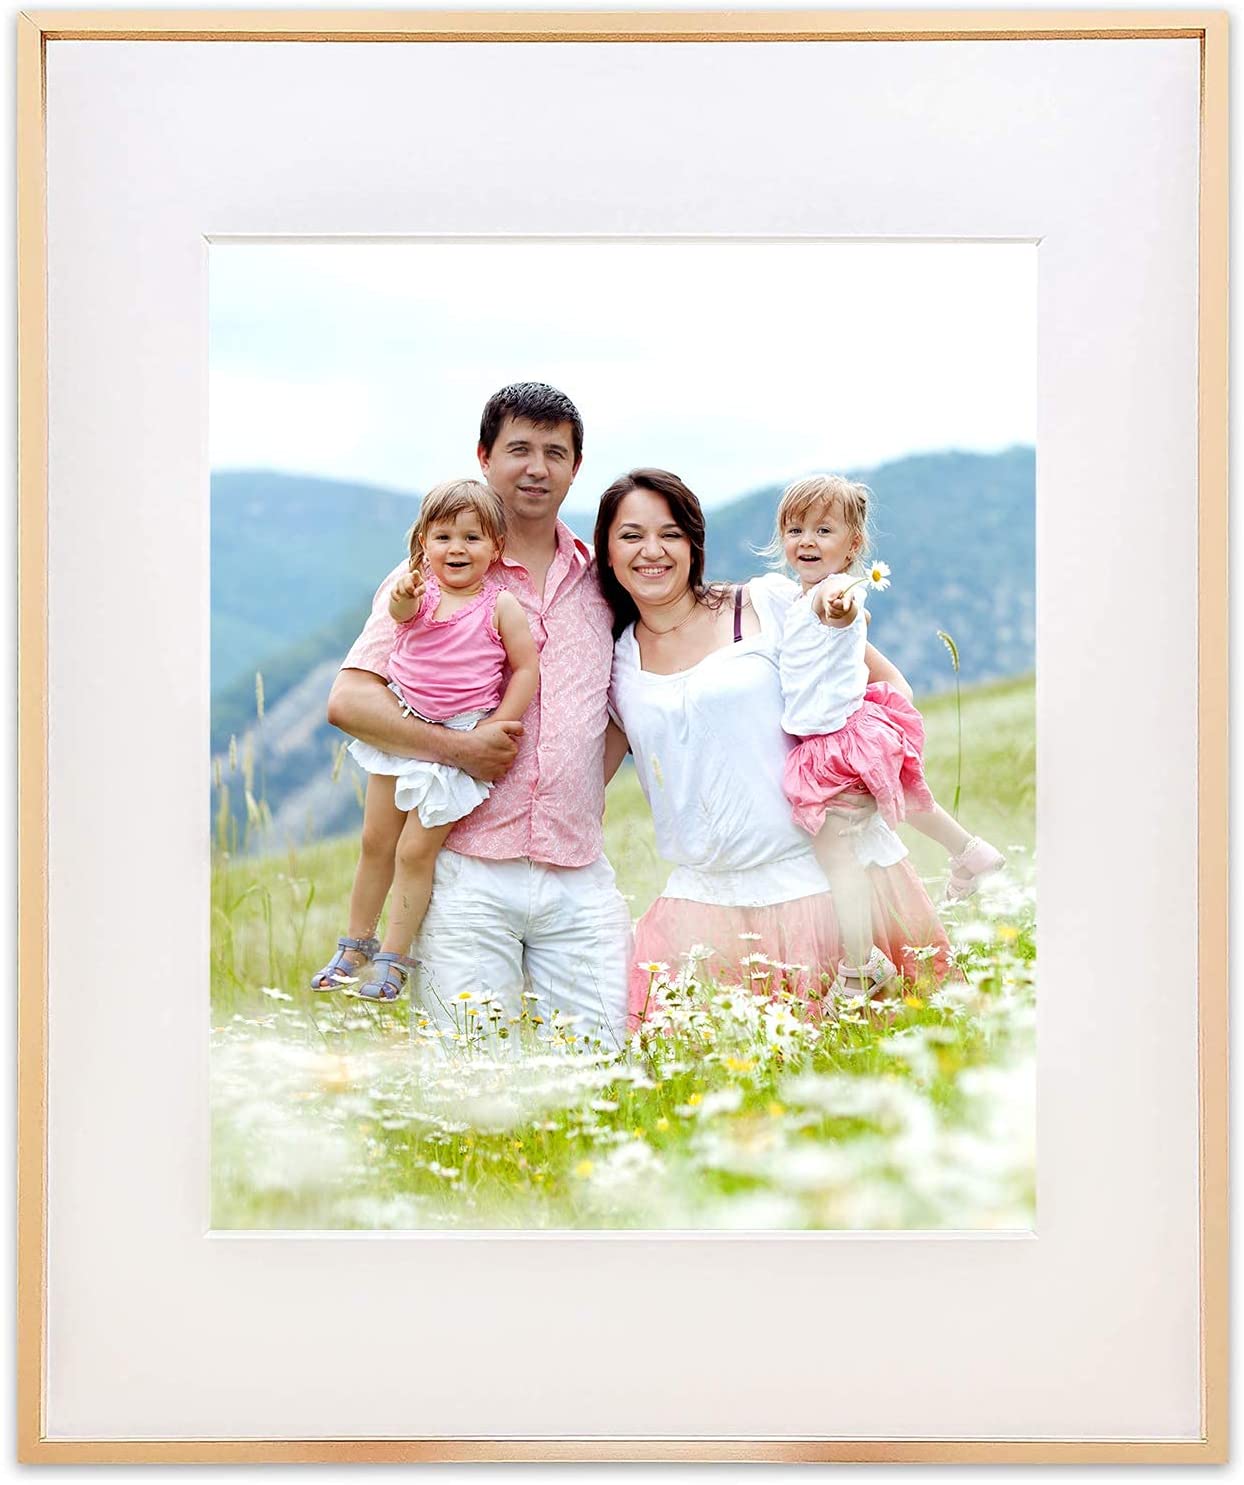 11" x 14" Gold Aluminum Picture Frame with Tempered Glass, 8" x 10" Matted